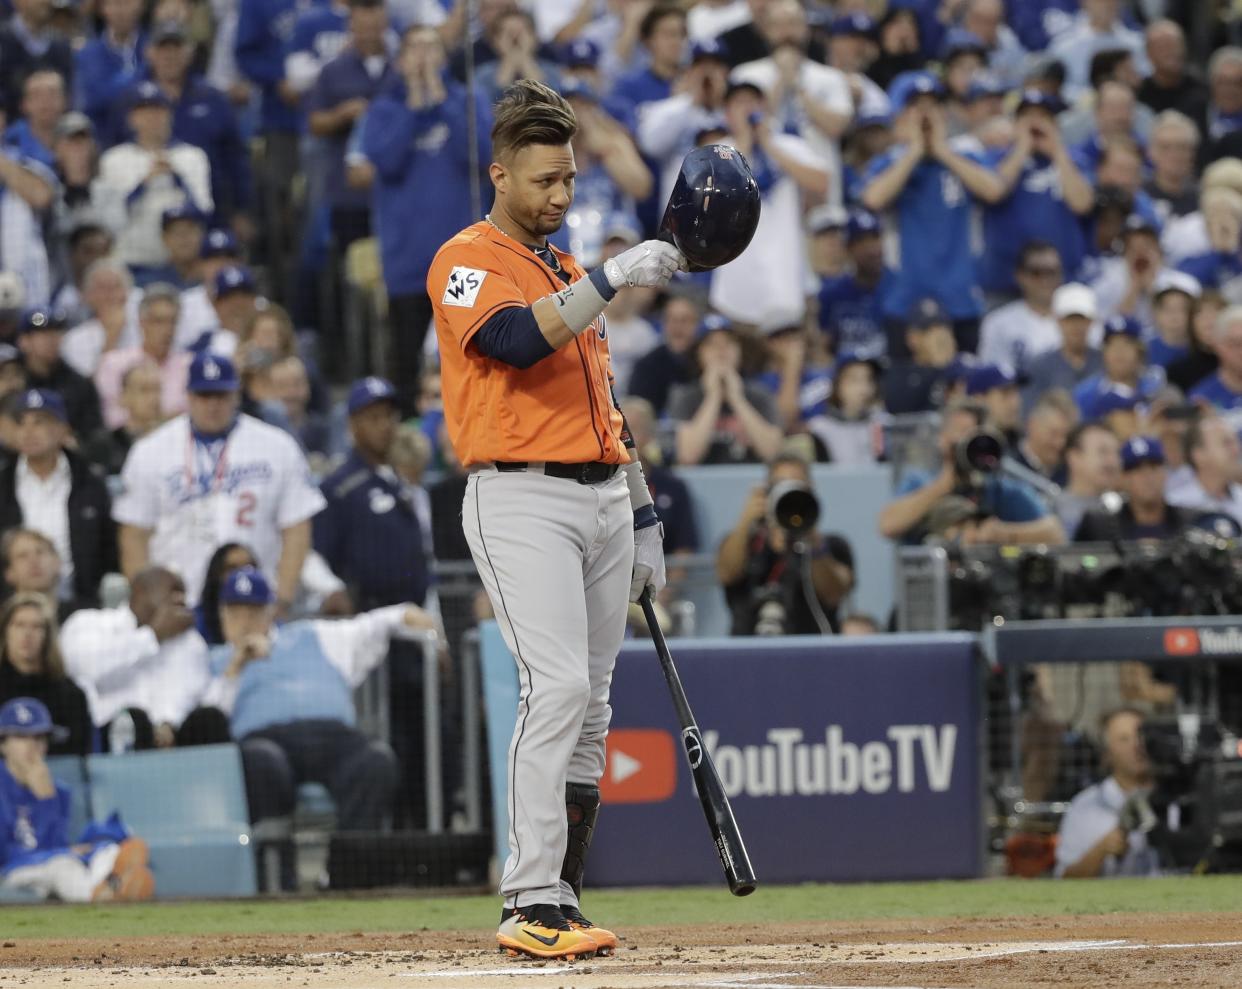 Yuli Gurriel tipped his helmet to Yu Darvish to apologize for his racist gesture during the World Series. (AP)